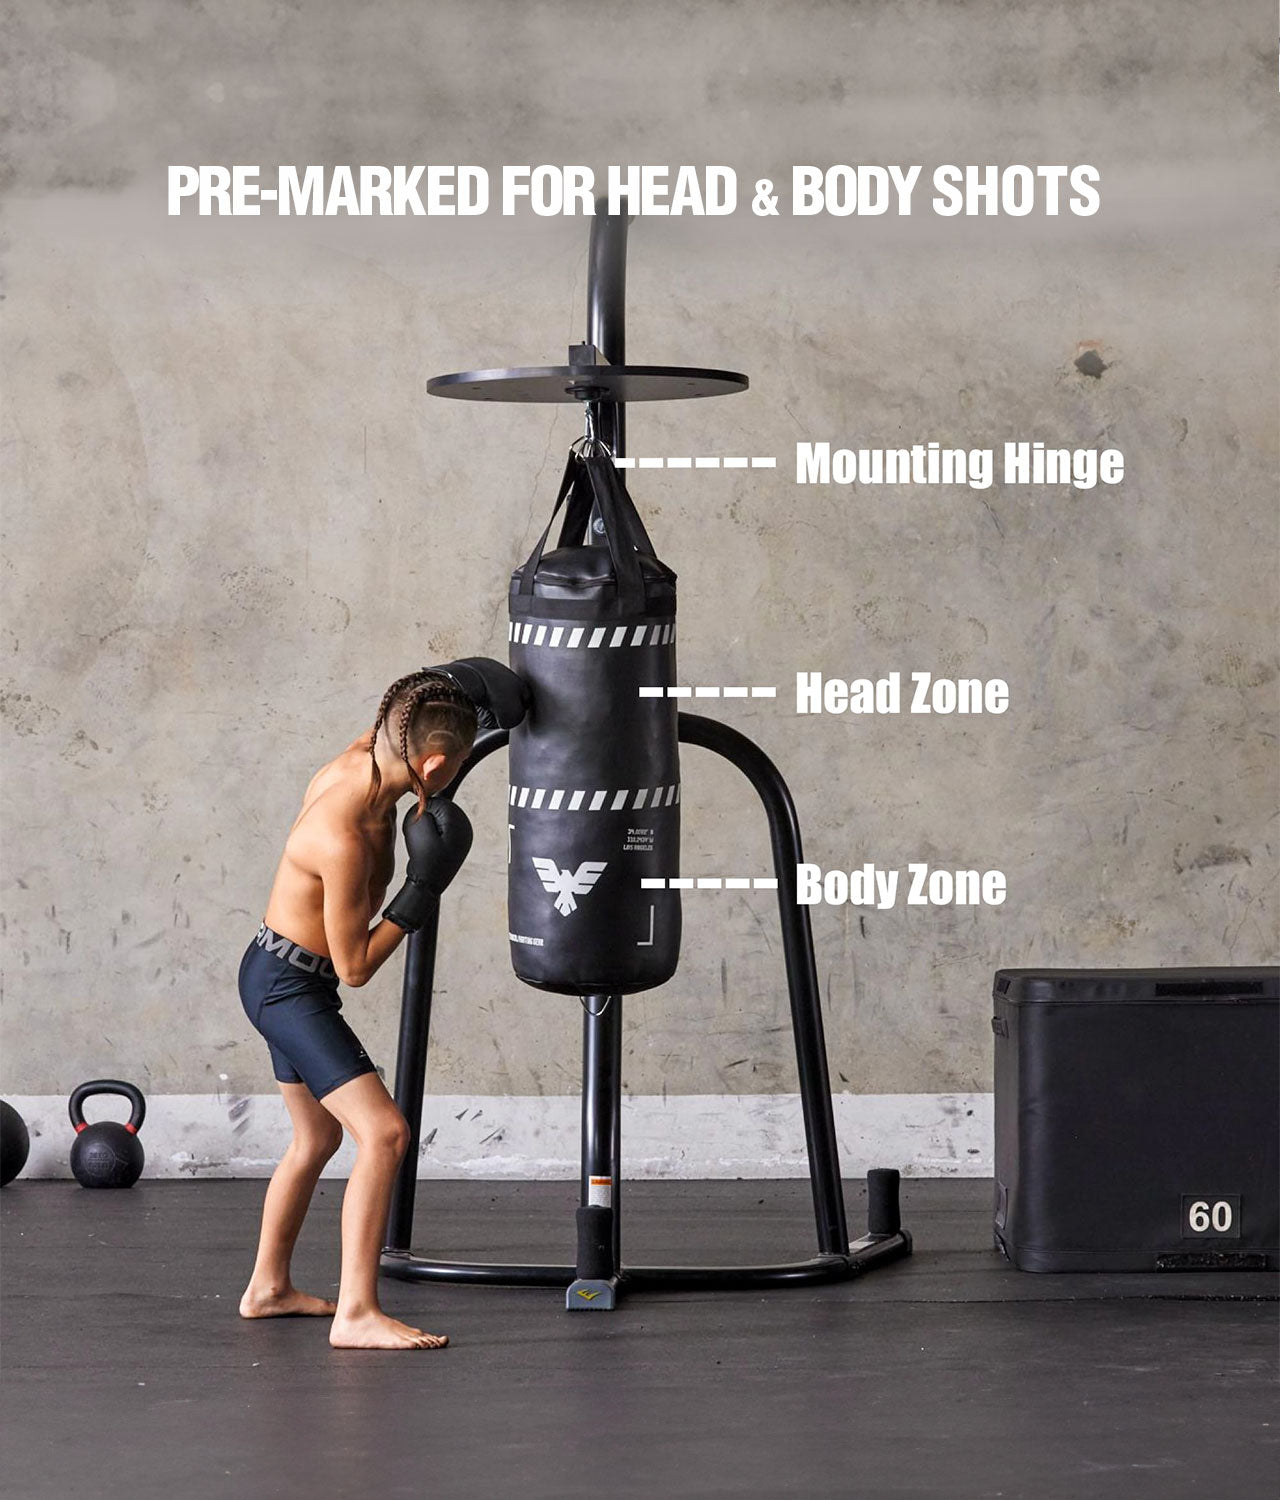 Elite Sports Kids 2.5 ft Essential Boxing Punching Bag Set Pre-Marked For Head & Body Shots